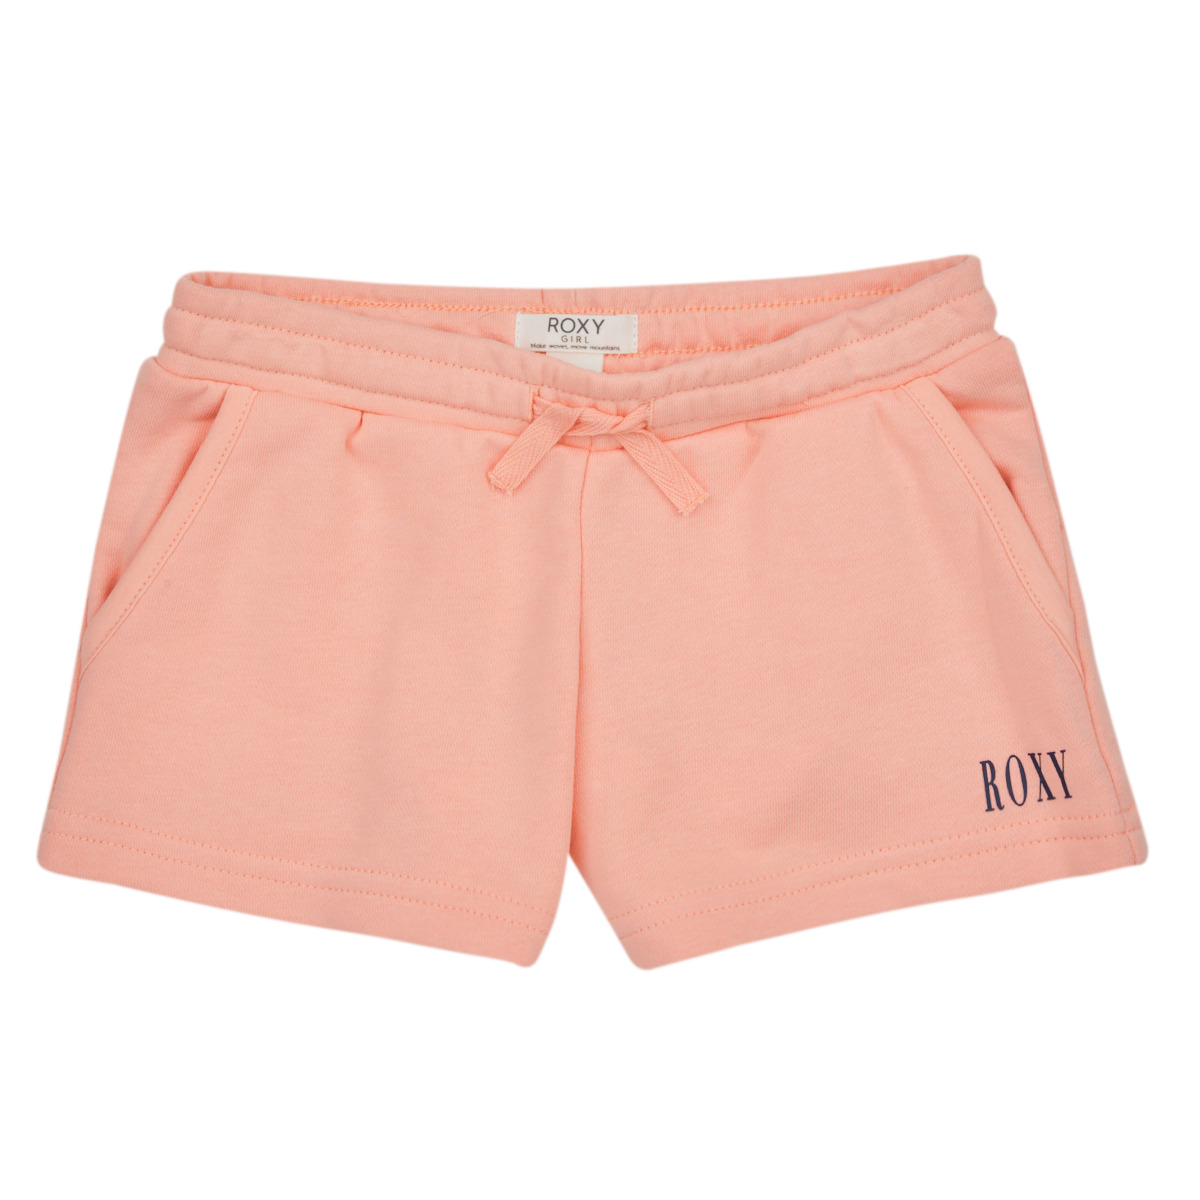 Clothing FOREVER HAPPINESS - ORIGIN NET ! Roxy Free Shorts SHORT delivery Child Bermudas | / Spartoo - Pink